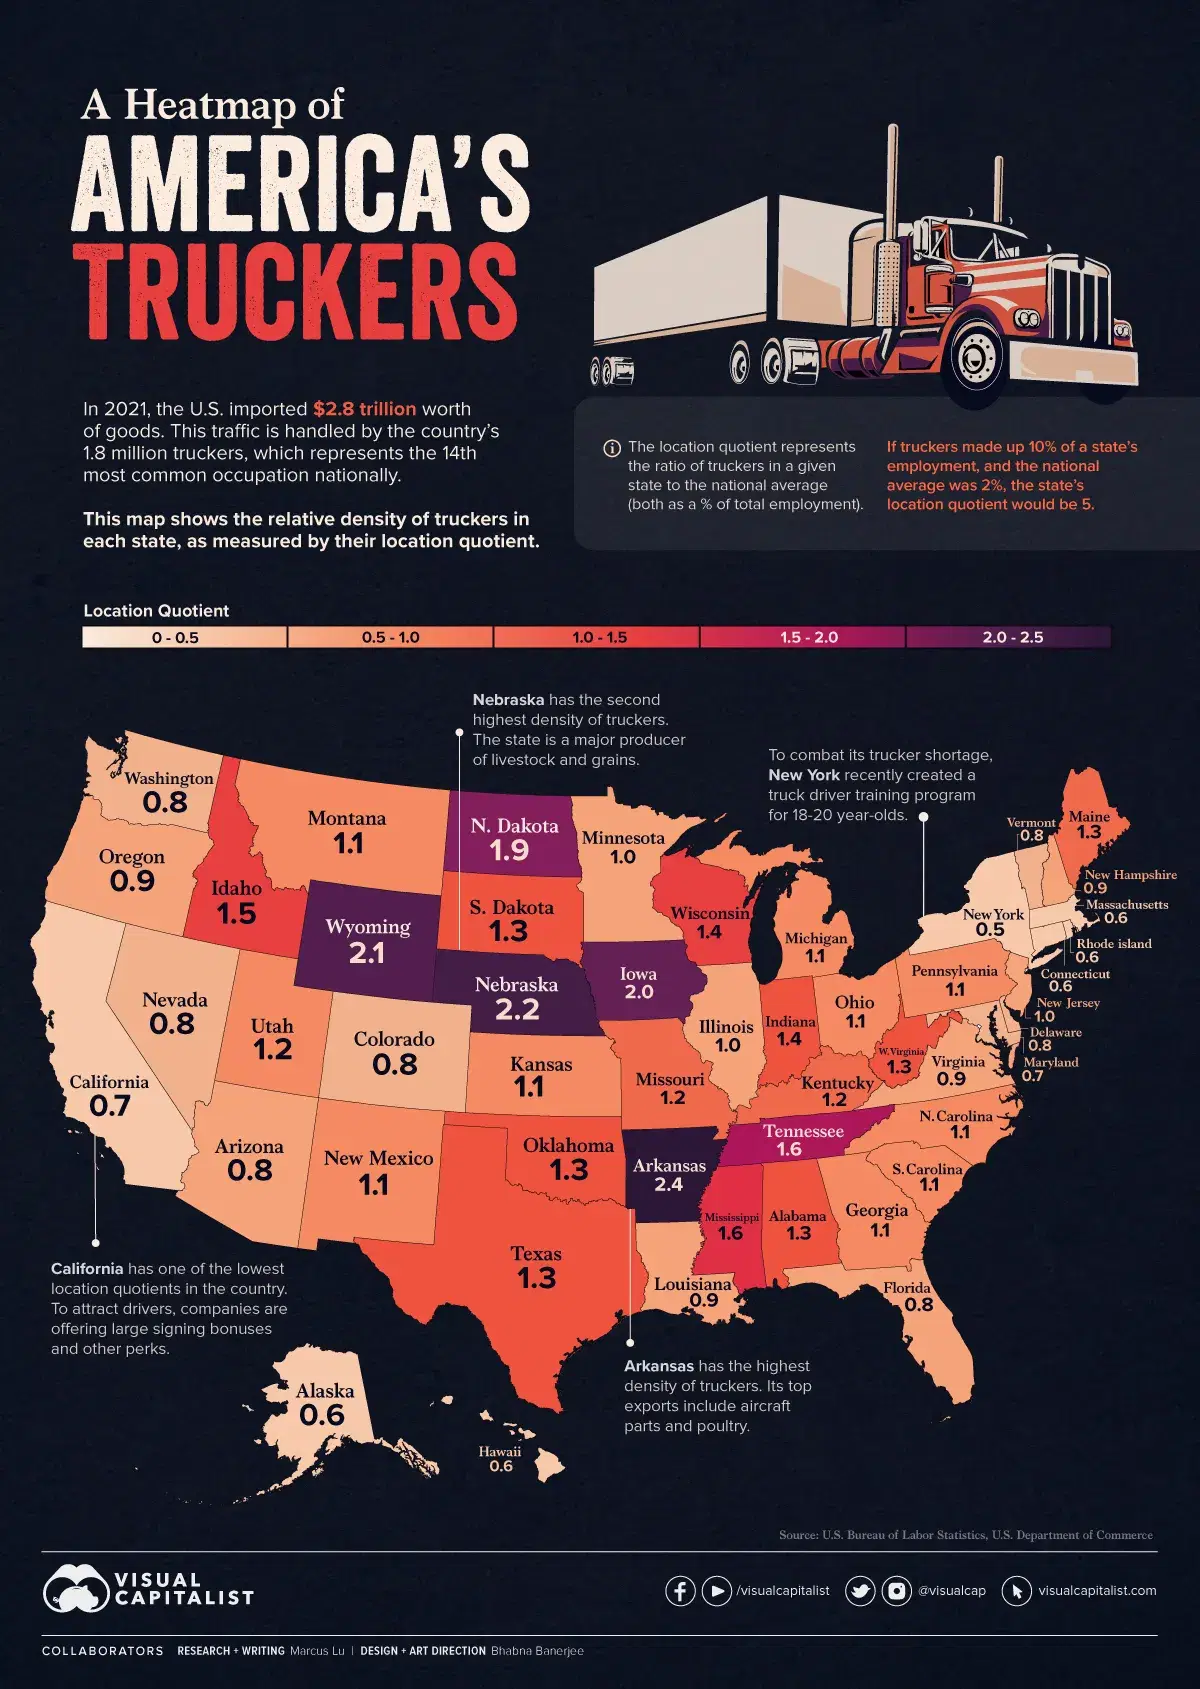 Where America’s Truckers Live, by State